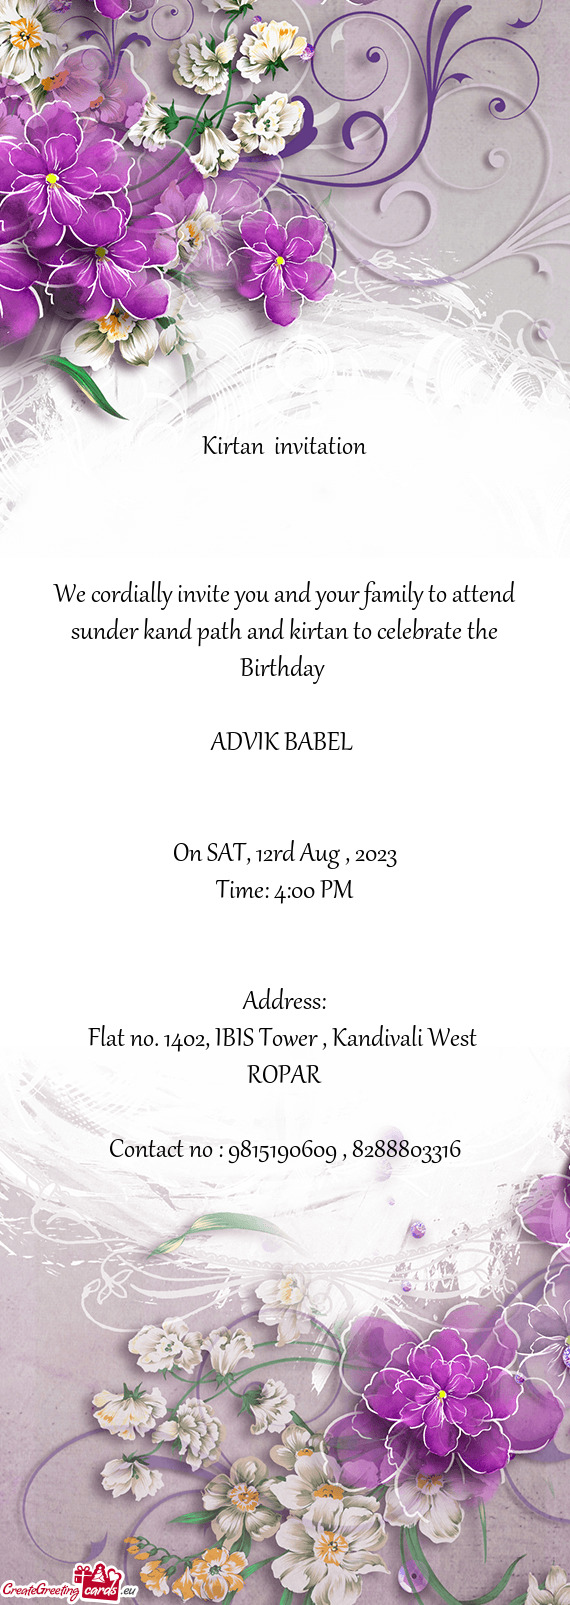 We cordially invite you and your family to attend sunder kand path and kirtan to celebrate the Birth